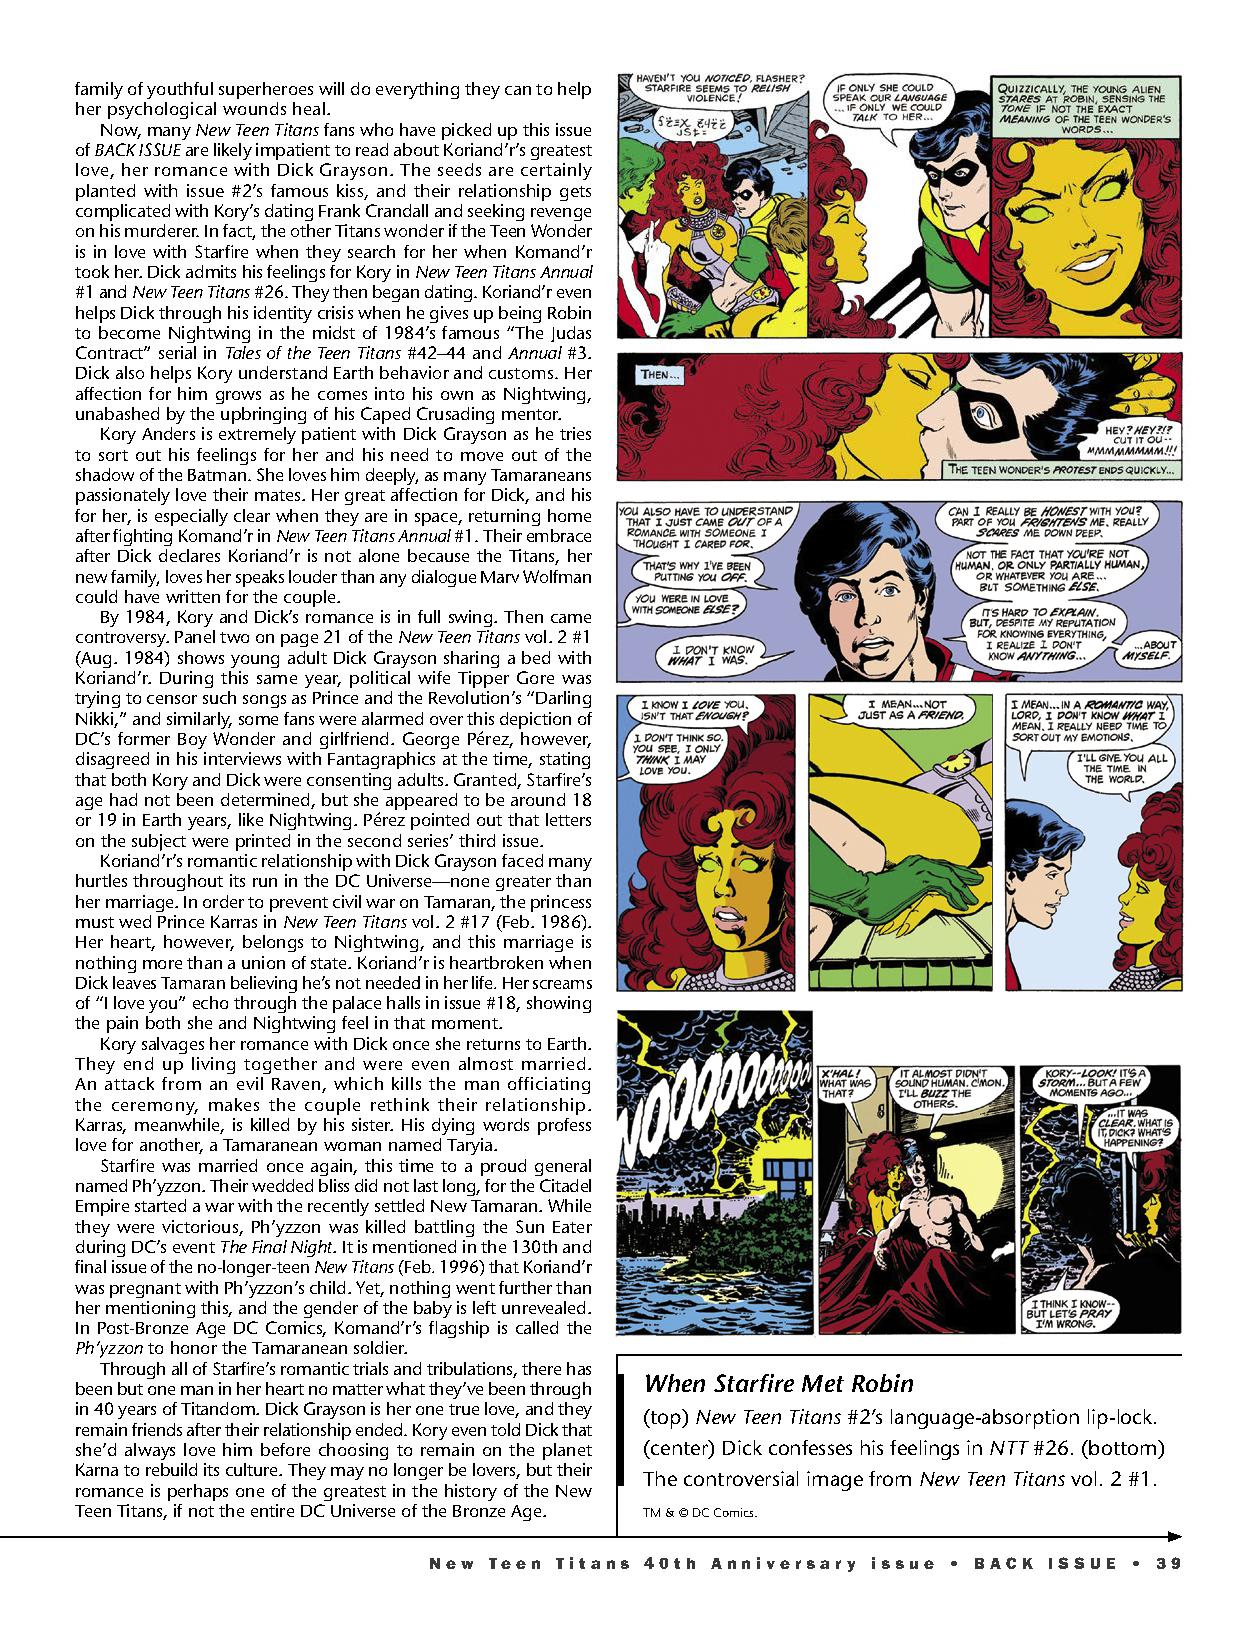 Read online Back Issue comic -  Issue #122 - 41